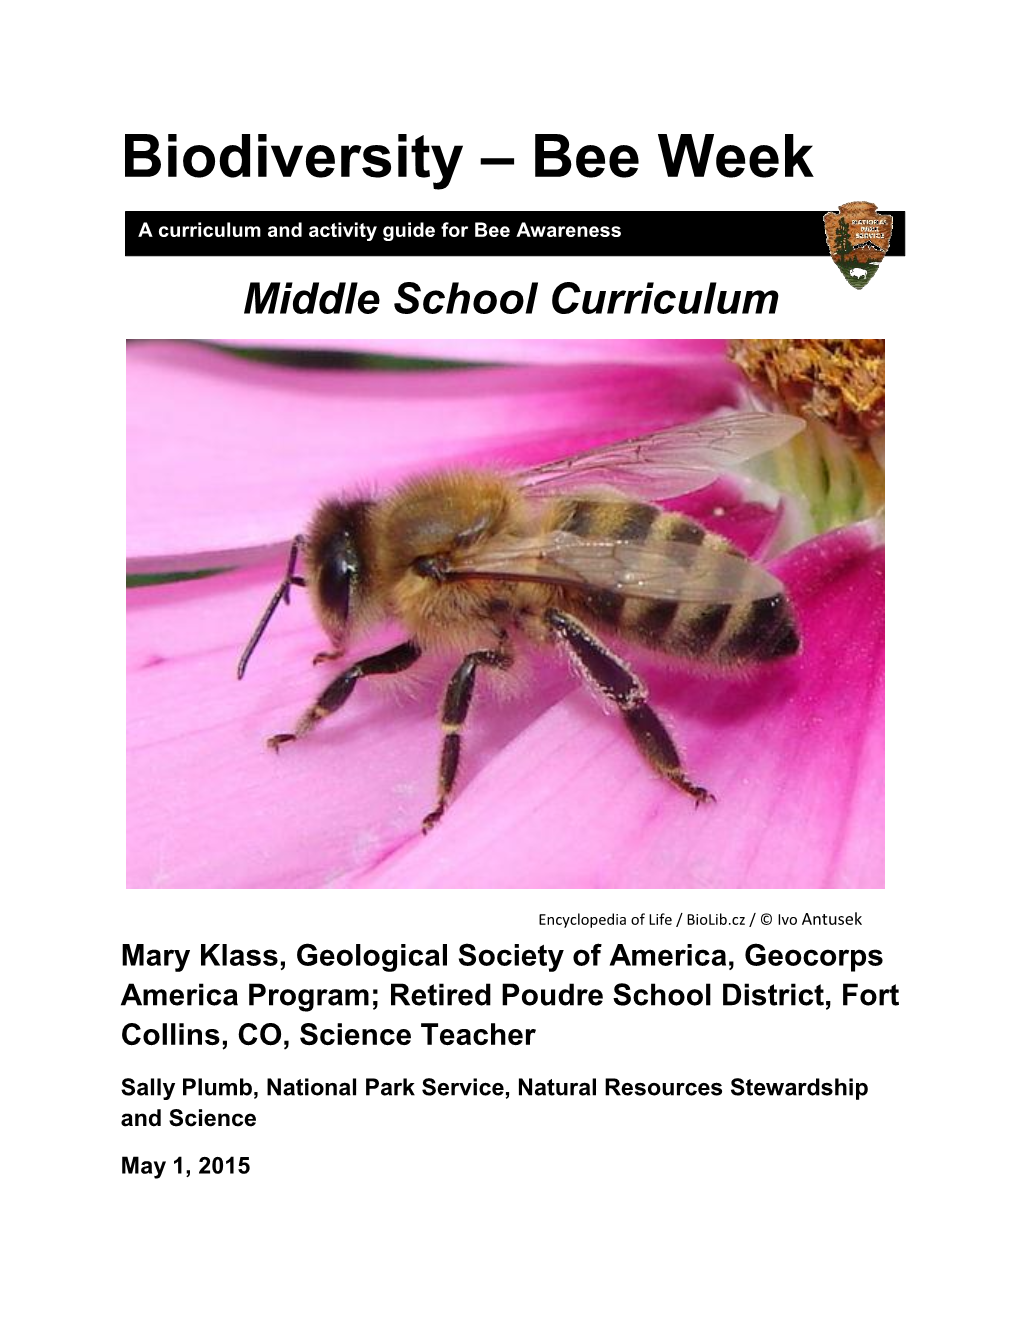 Biodiversity – Bee Week a Curriculum and Activity Guide for Bee Awareness Middle School Curriculum